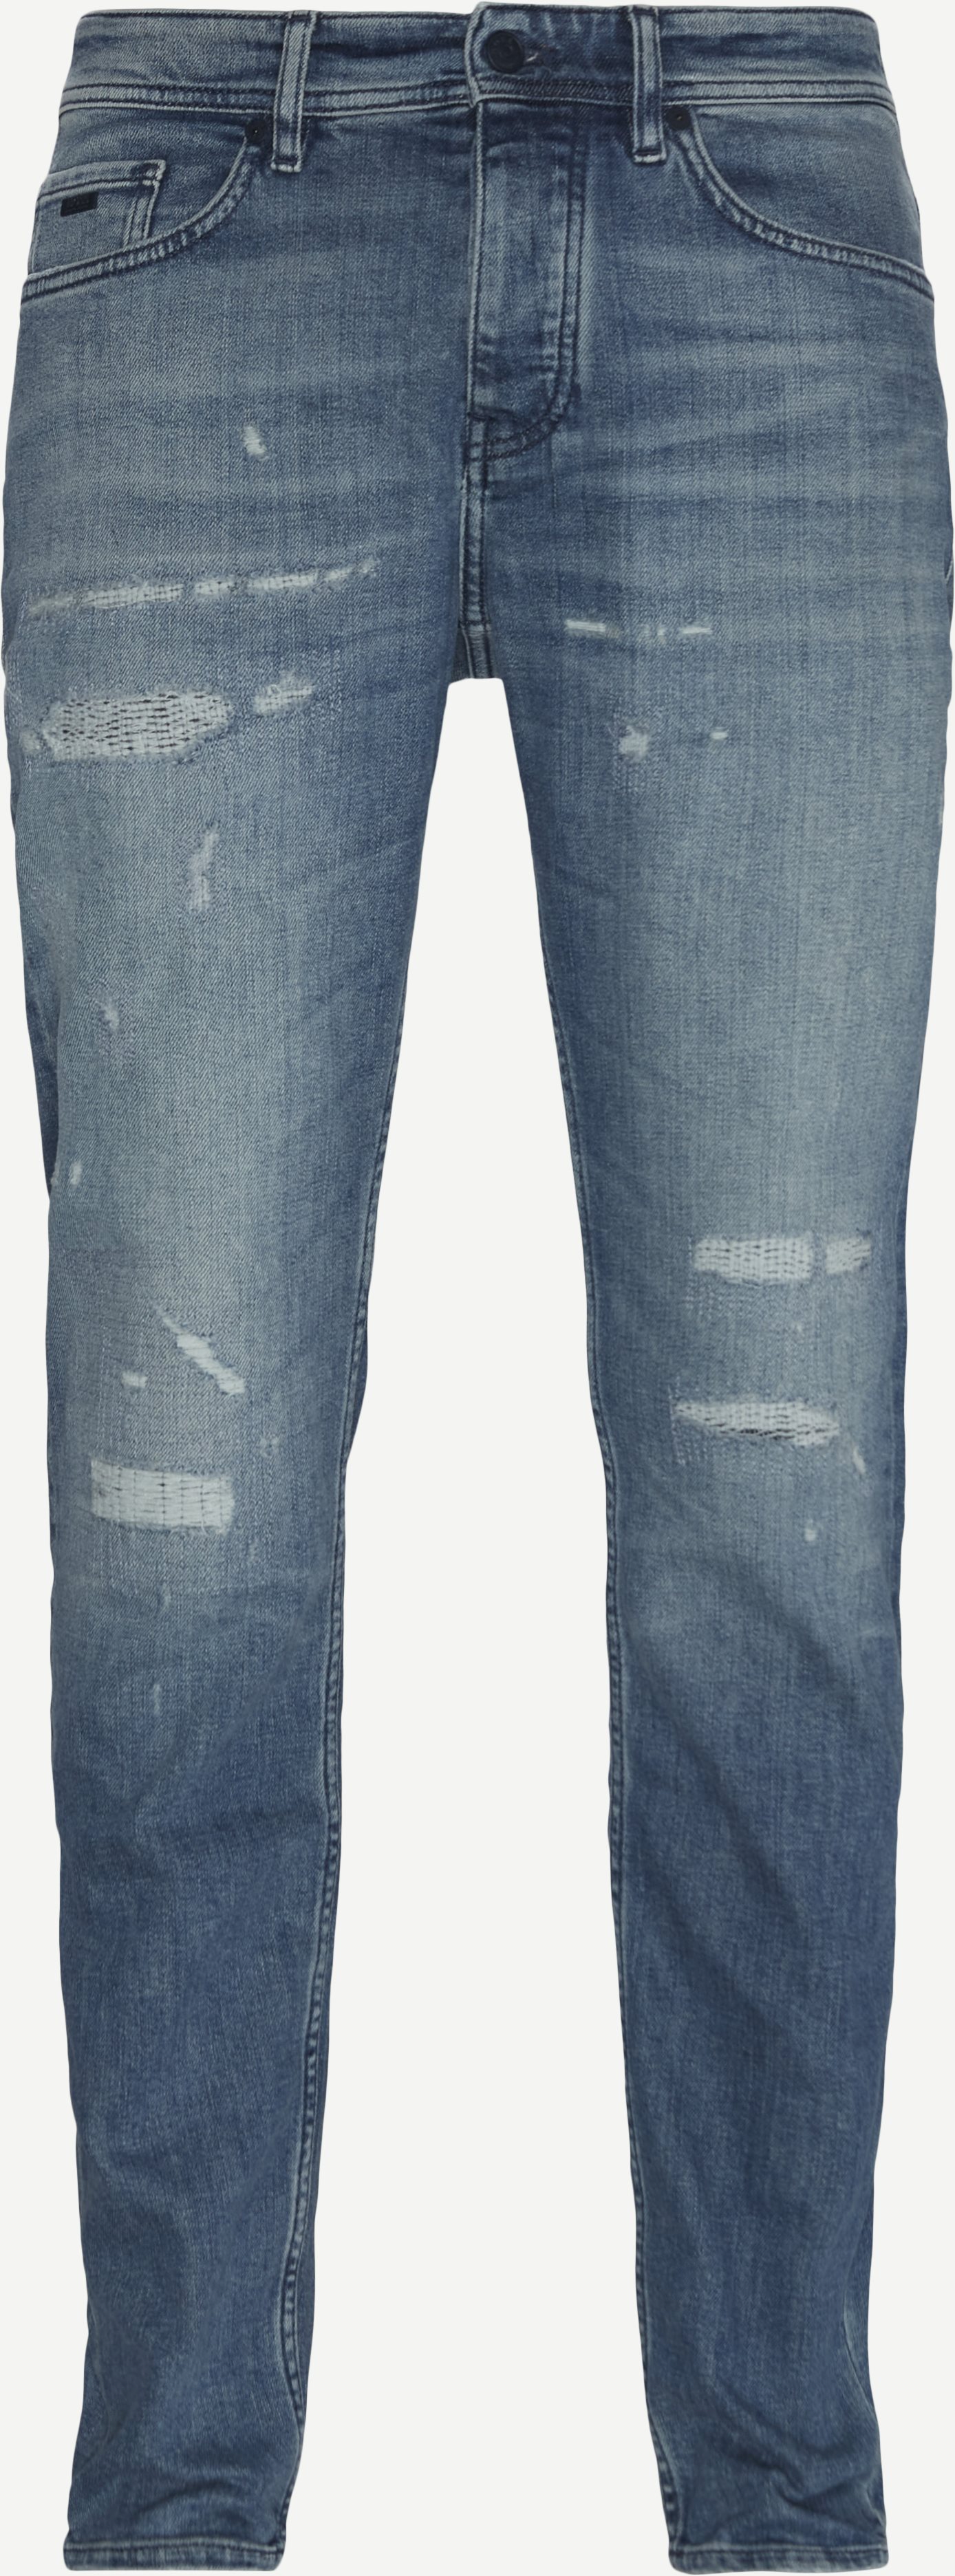 Taber BC-C Urban Jeans - Jeans - Tapered fit - Denim